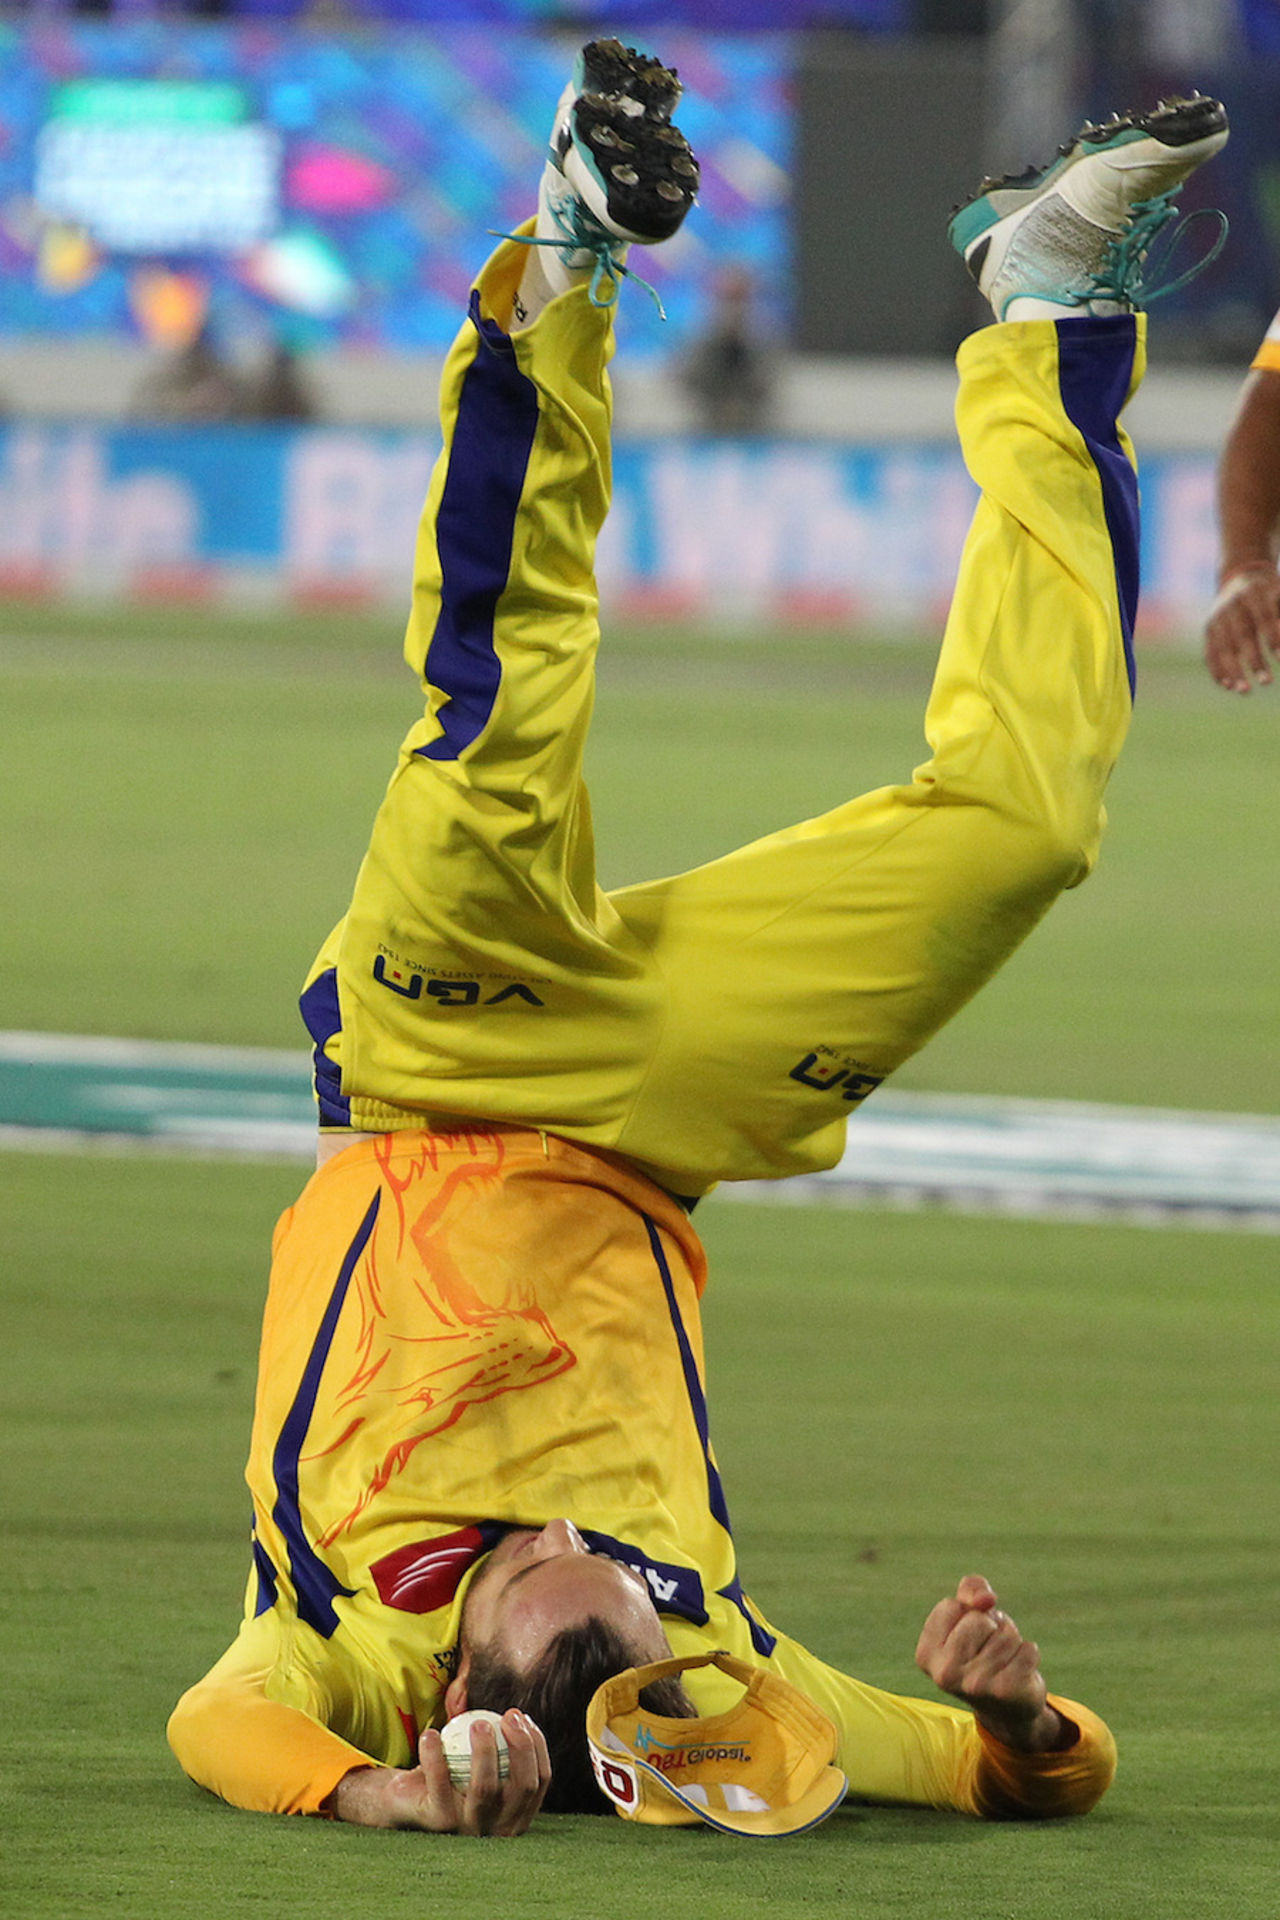 Faf du Plessis goes upside down to complete a catch, Kings XI Punjab v Chennai Super Kings, 2nd semi-final, CLT20, Hyderabad, October 2, 2014